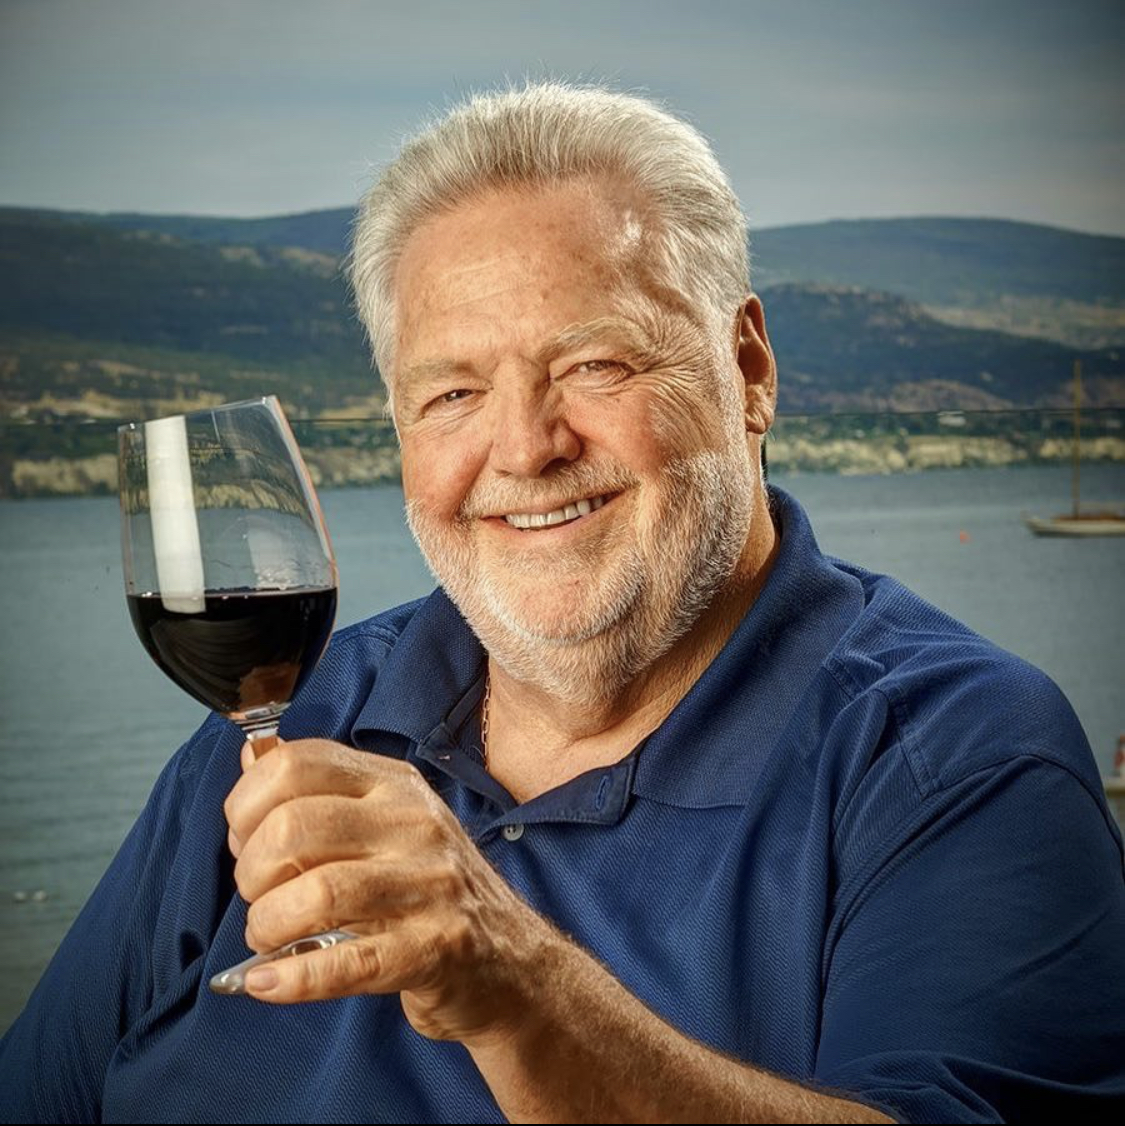 Harry McWatters was ineligible to receive the Harry McWatters Founder's Award during his lifetime as the founder of OK Wine Festivals Society. To nominate a candidate for this 2020 Award, click the link below.Nominations accepted until Fri. Sept. 11. thewinefestivals.com/wine_awards/th…